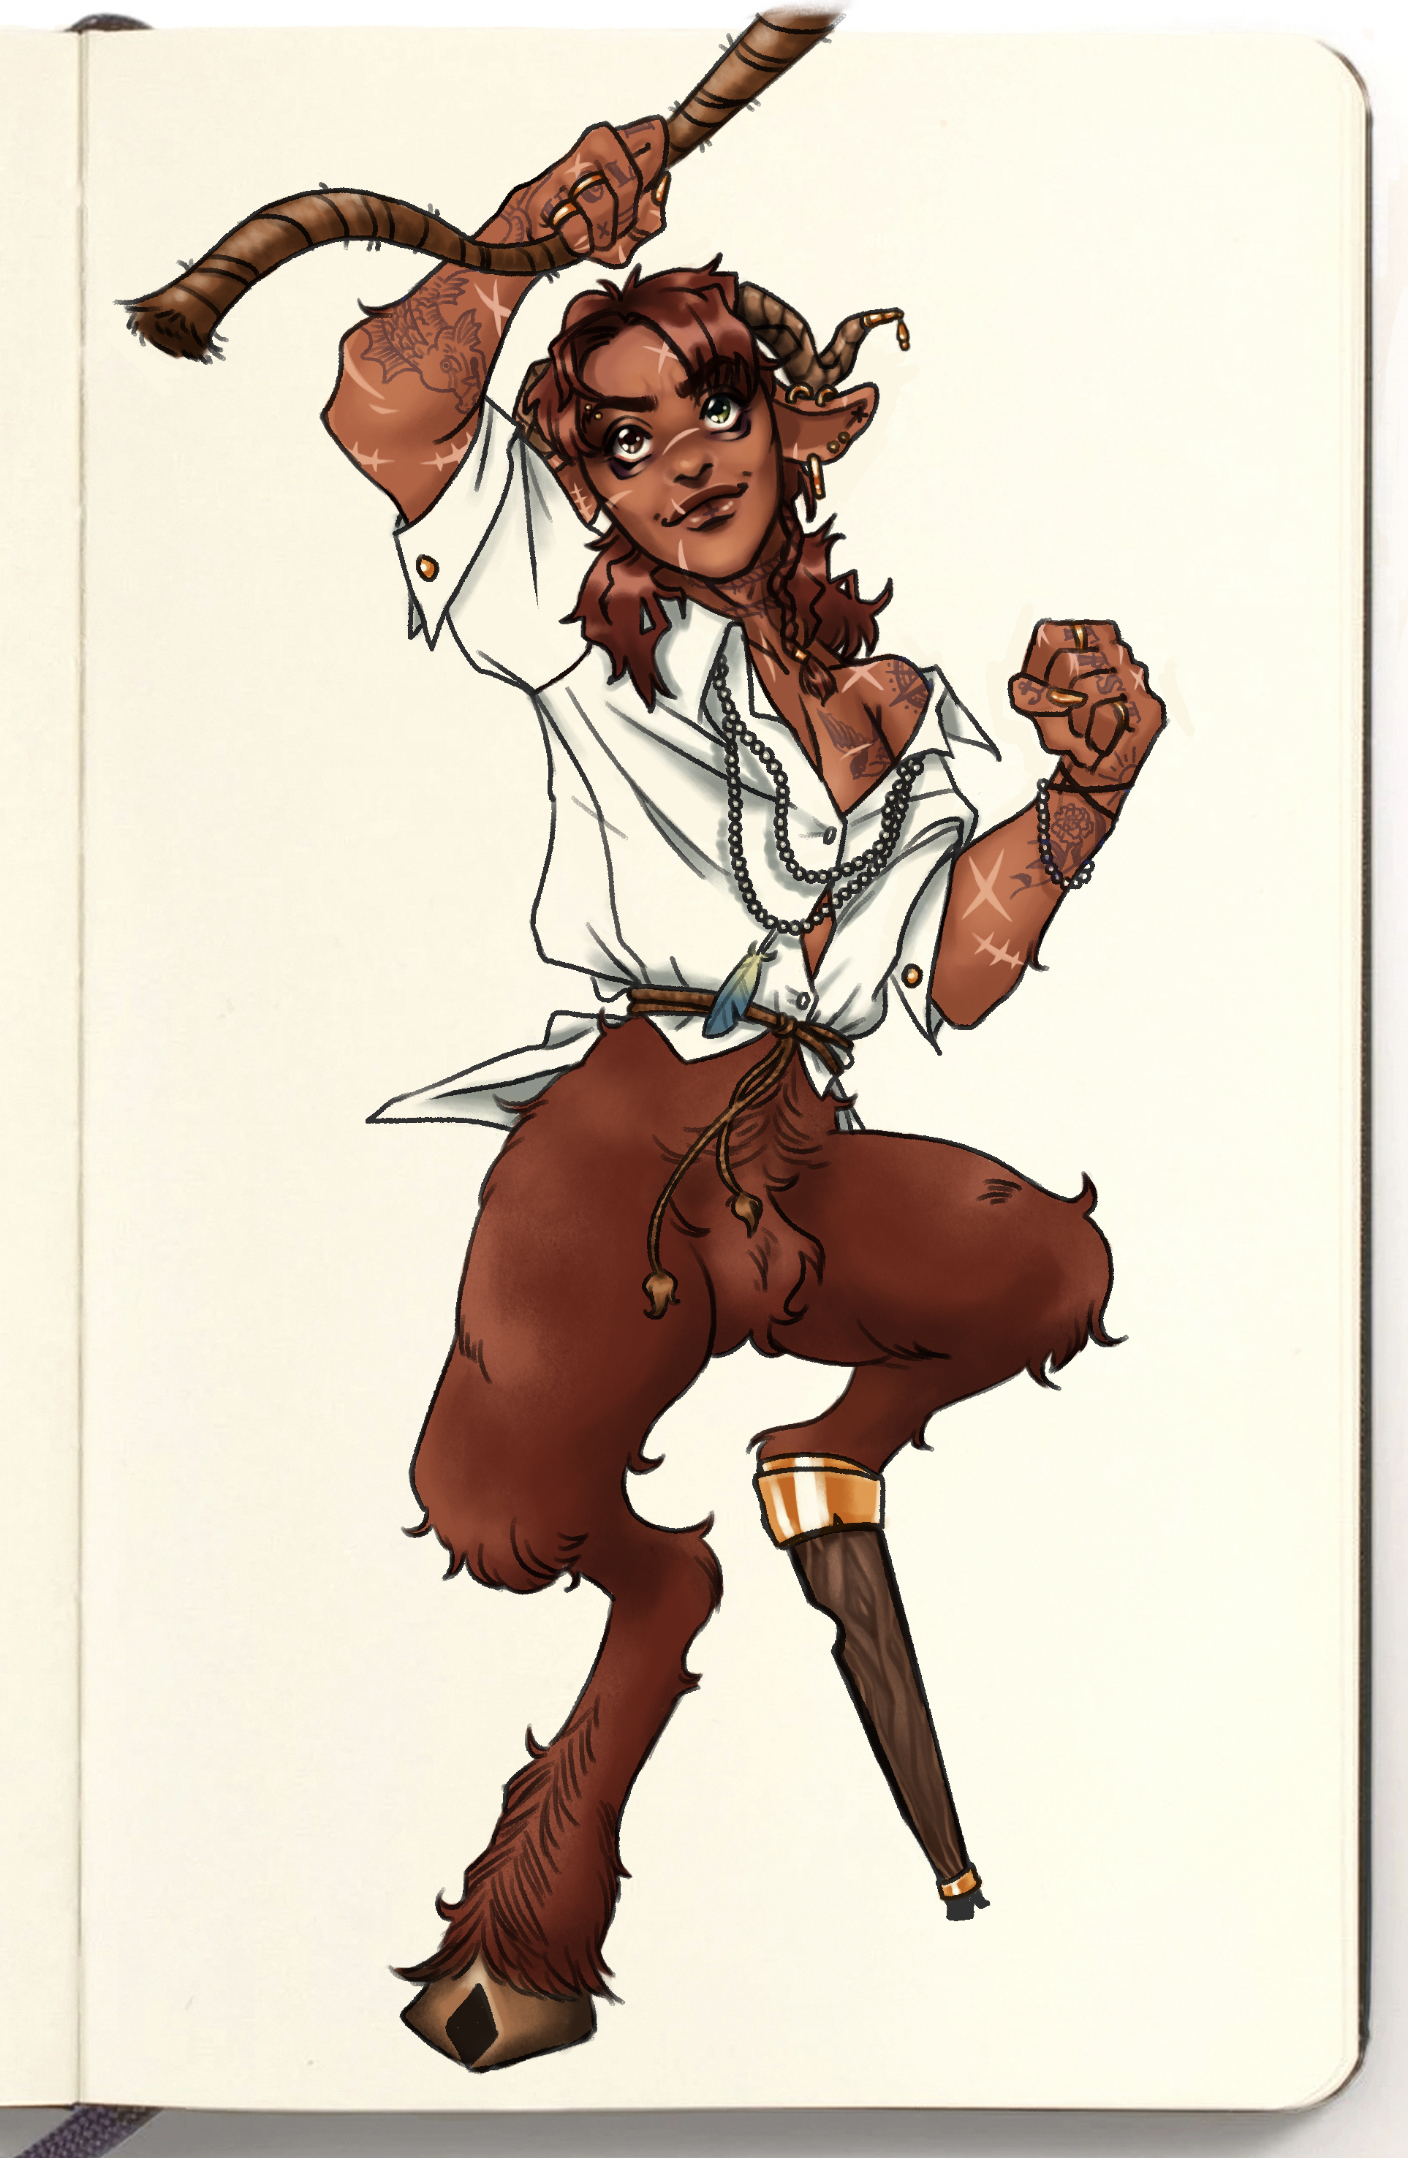 Art of Kim Hongjoong from ATEEZ as a pirate satyr, swinging on a rope.